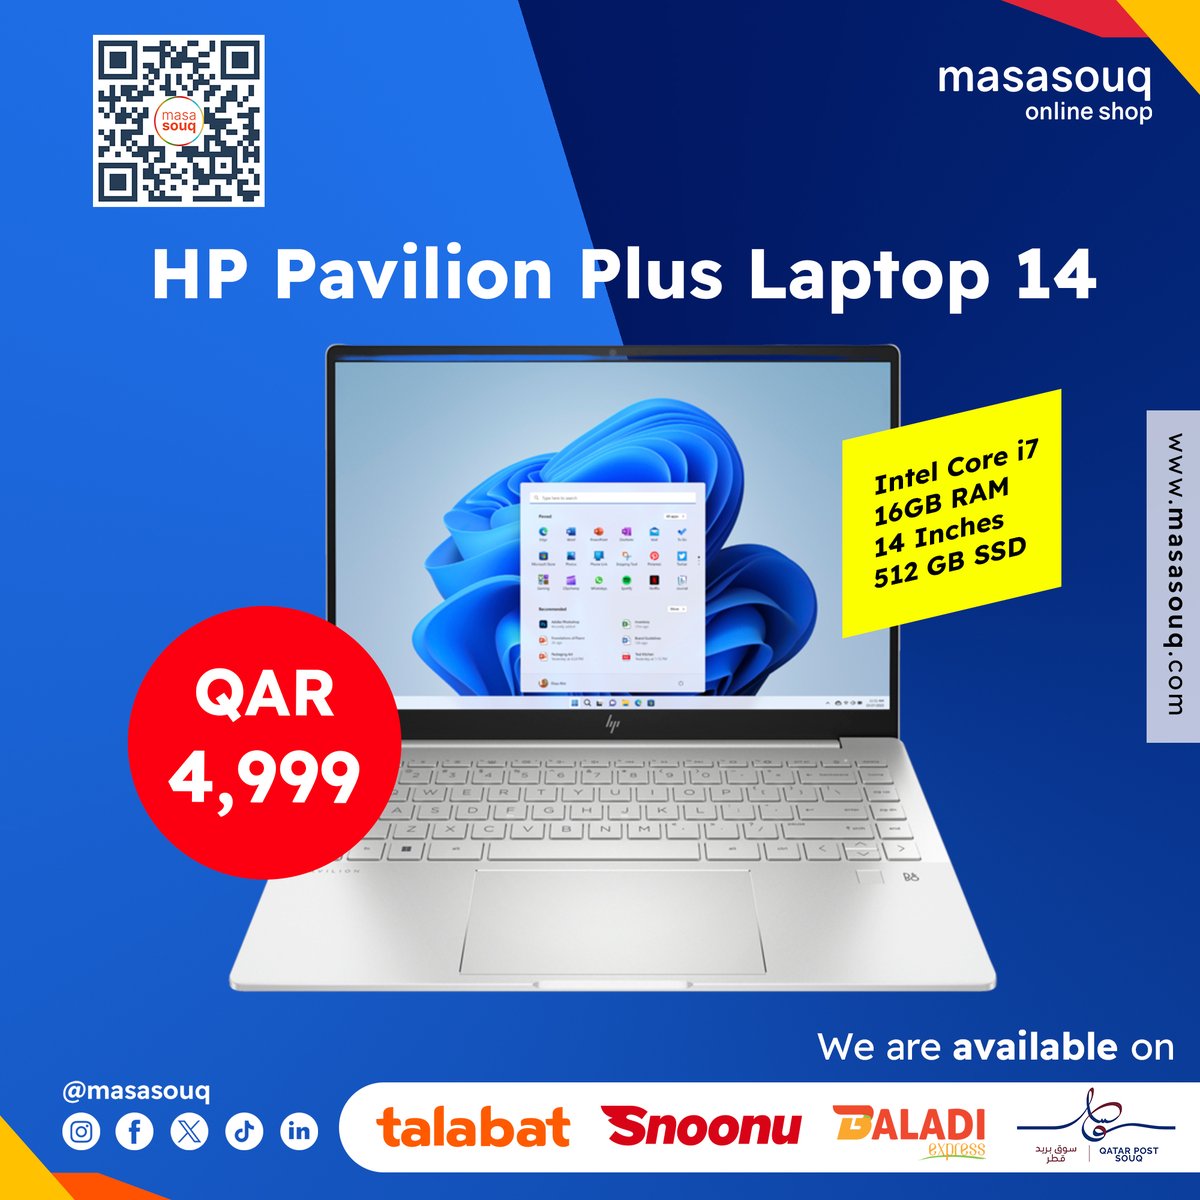 ✨ Work and play in style with the HP Pavilion Plus Laptop. This beauty boasts a powerful Intel Core i7, ample storage, and Windows 11 Home.

🔥 Snag it for QAR 4,999 👉masasouq.com/hp-pavilion-pl…

#HPPavilionPlus #laptop #style #power #Windows11 #sleekdesign #Masasouq